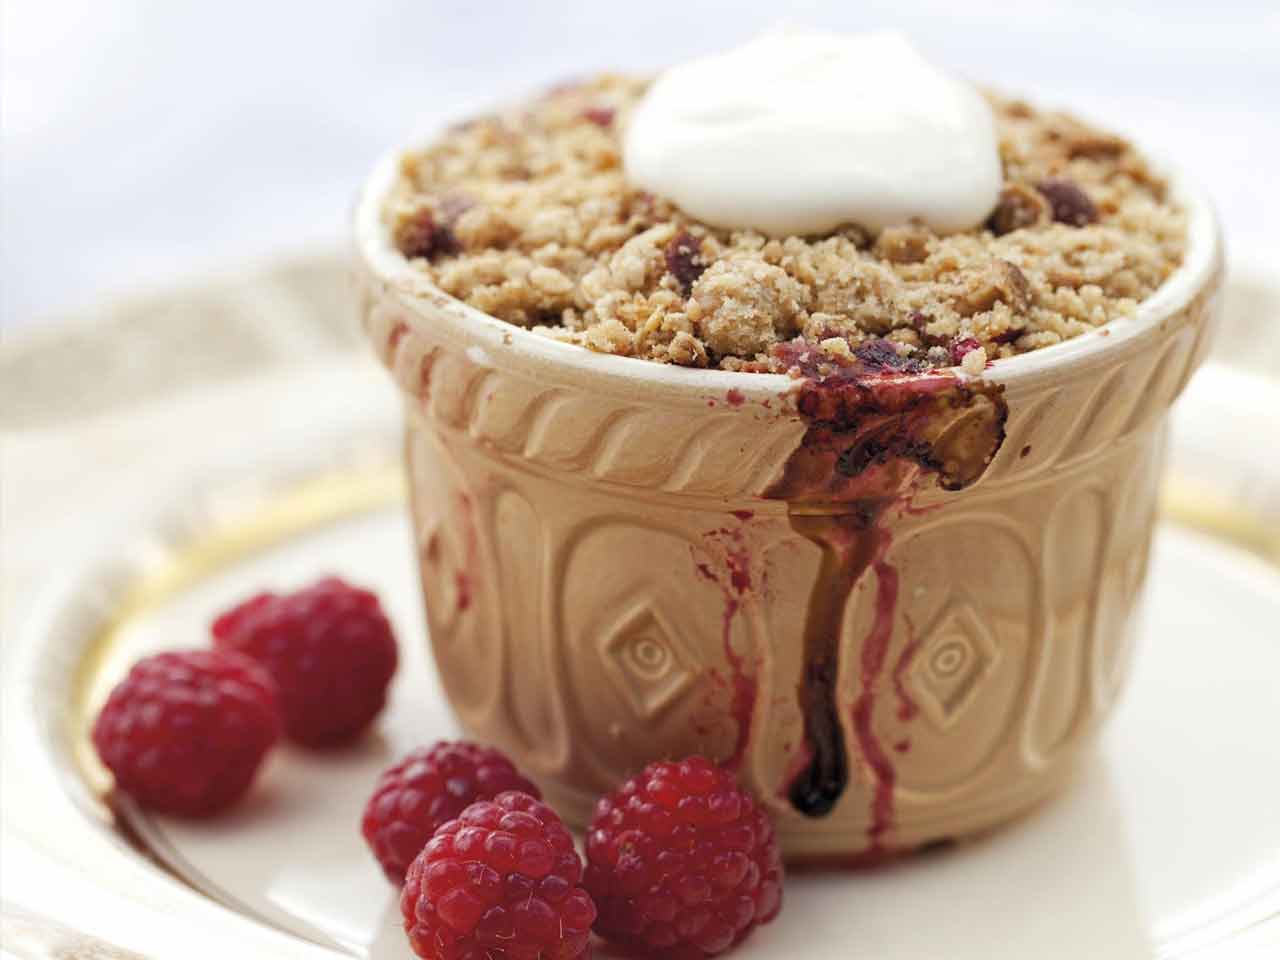 Annabel Langbein's rhubarb and berry crumble